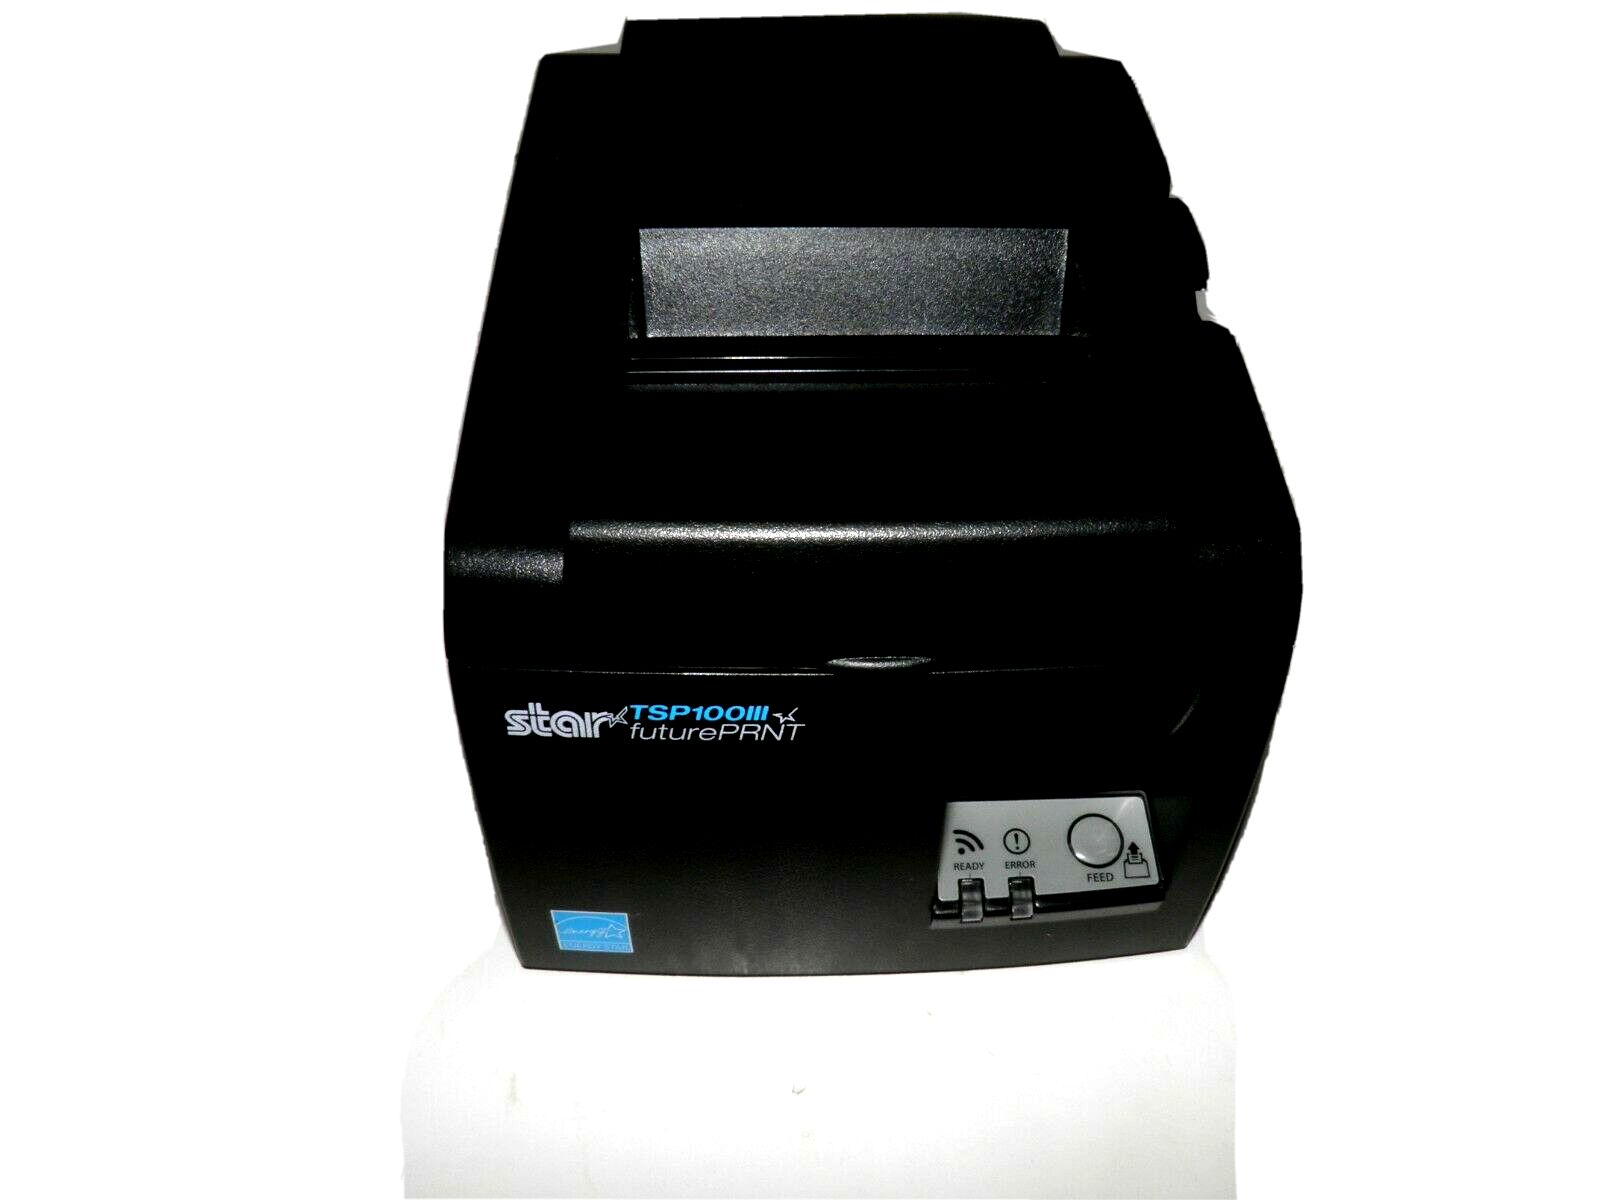 Primary image for Star TSP100 Thermal TSP143IIIW POS Receipt Printer w Power Cord WI-FI WORKS 100%